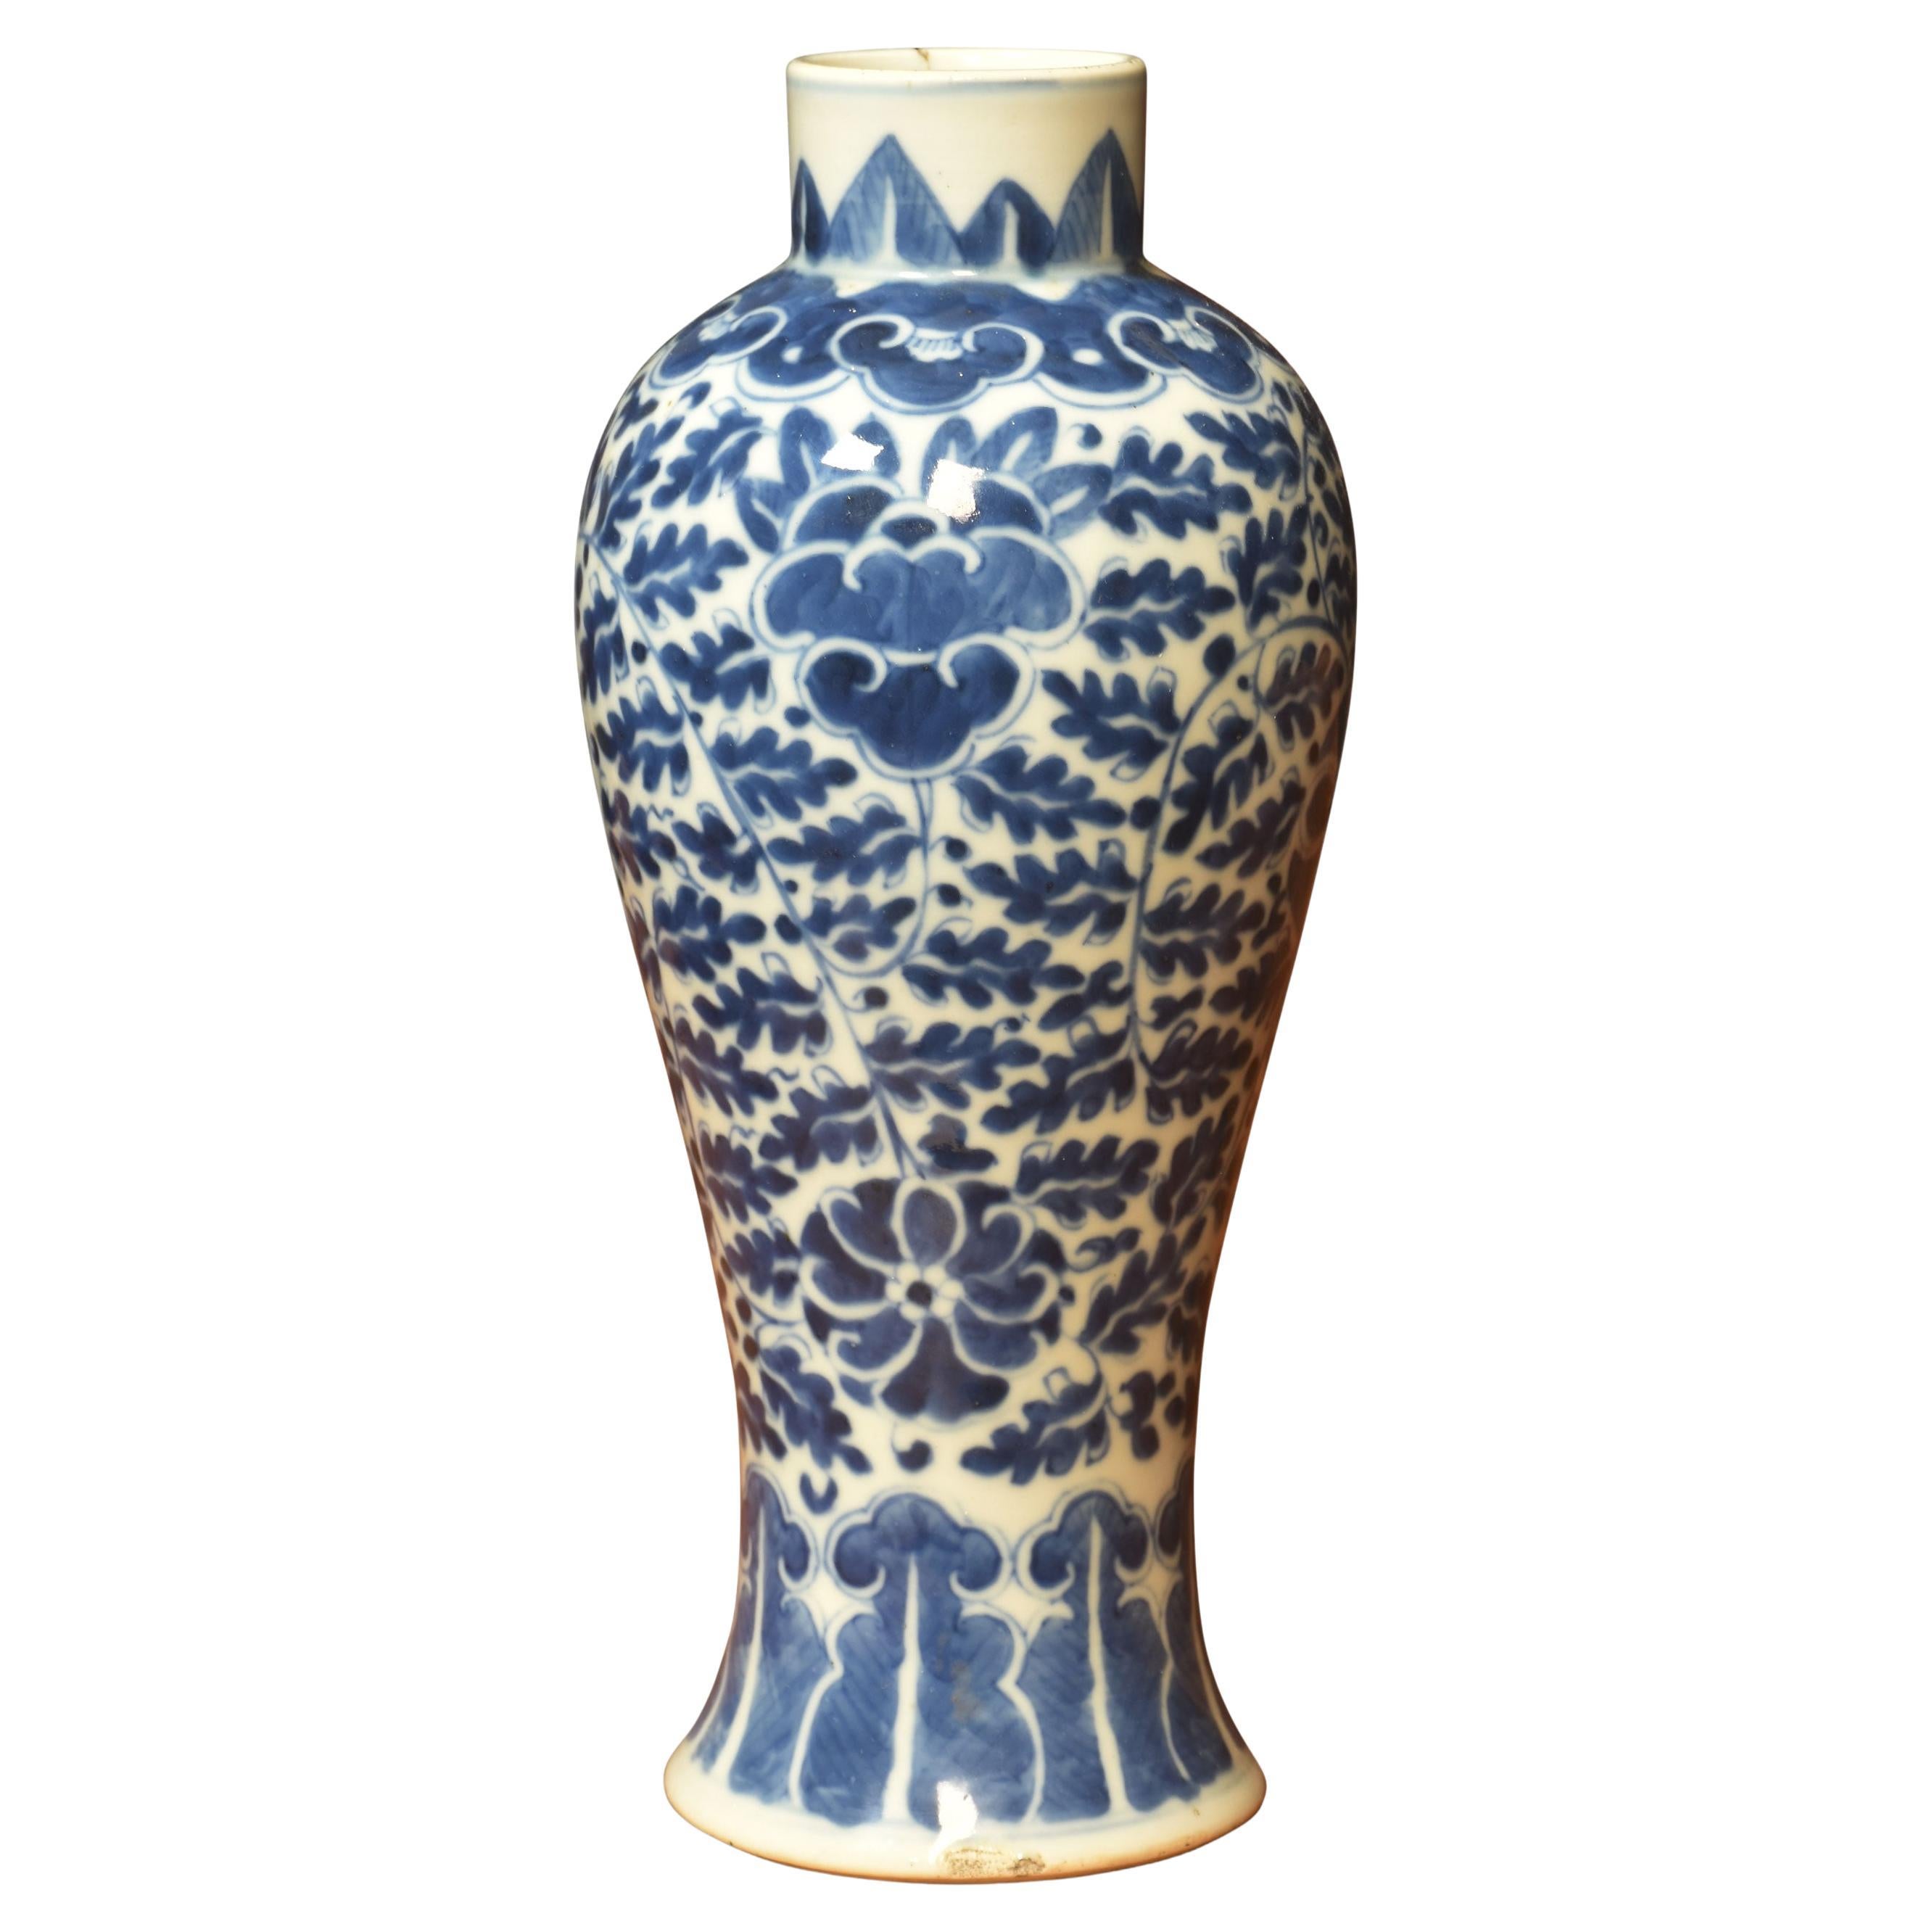 19th century Chinease vase